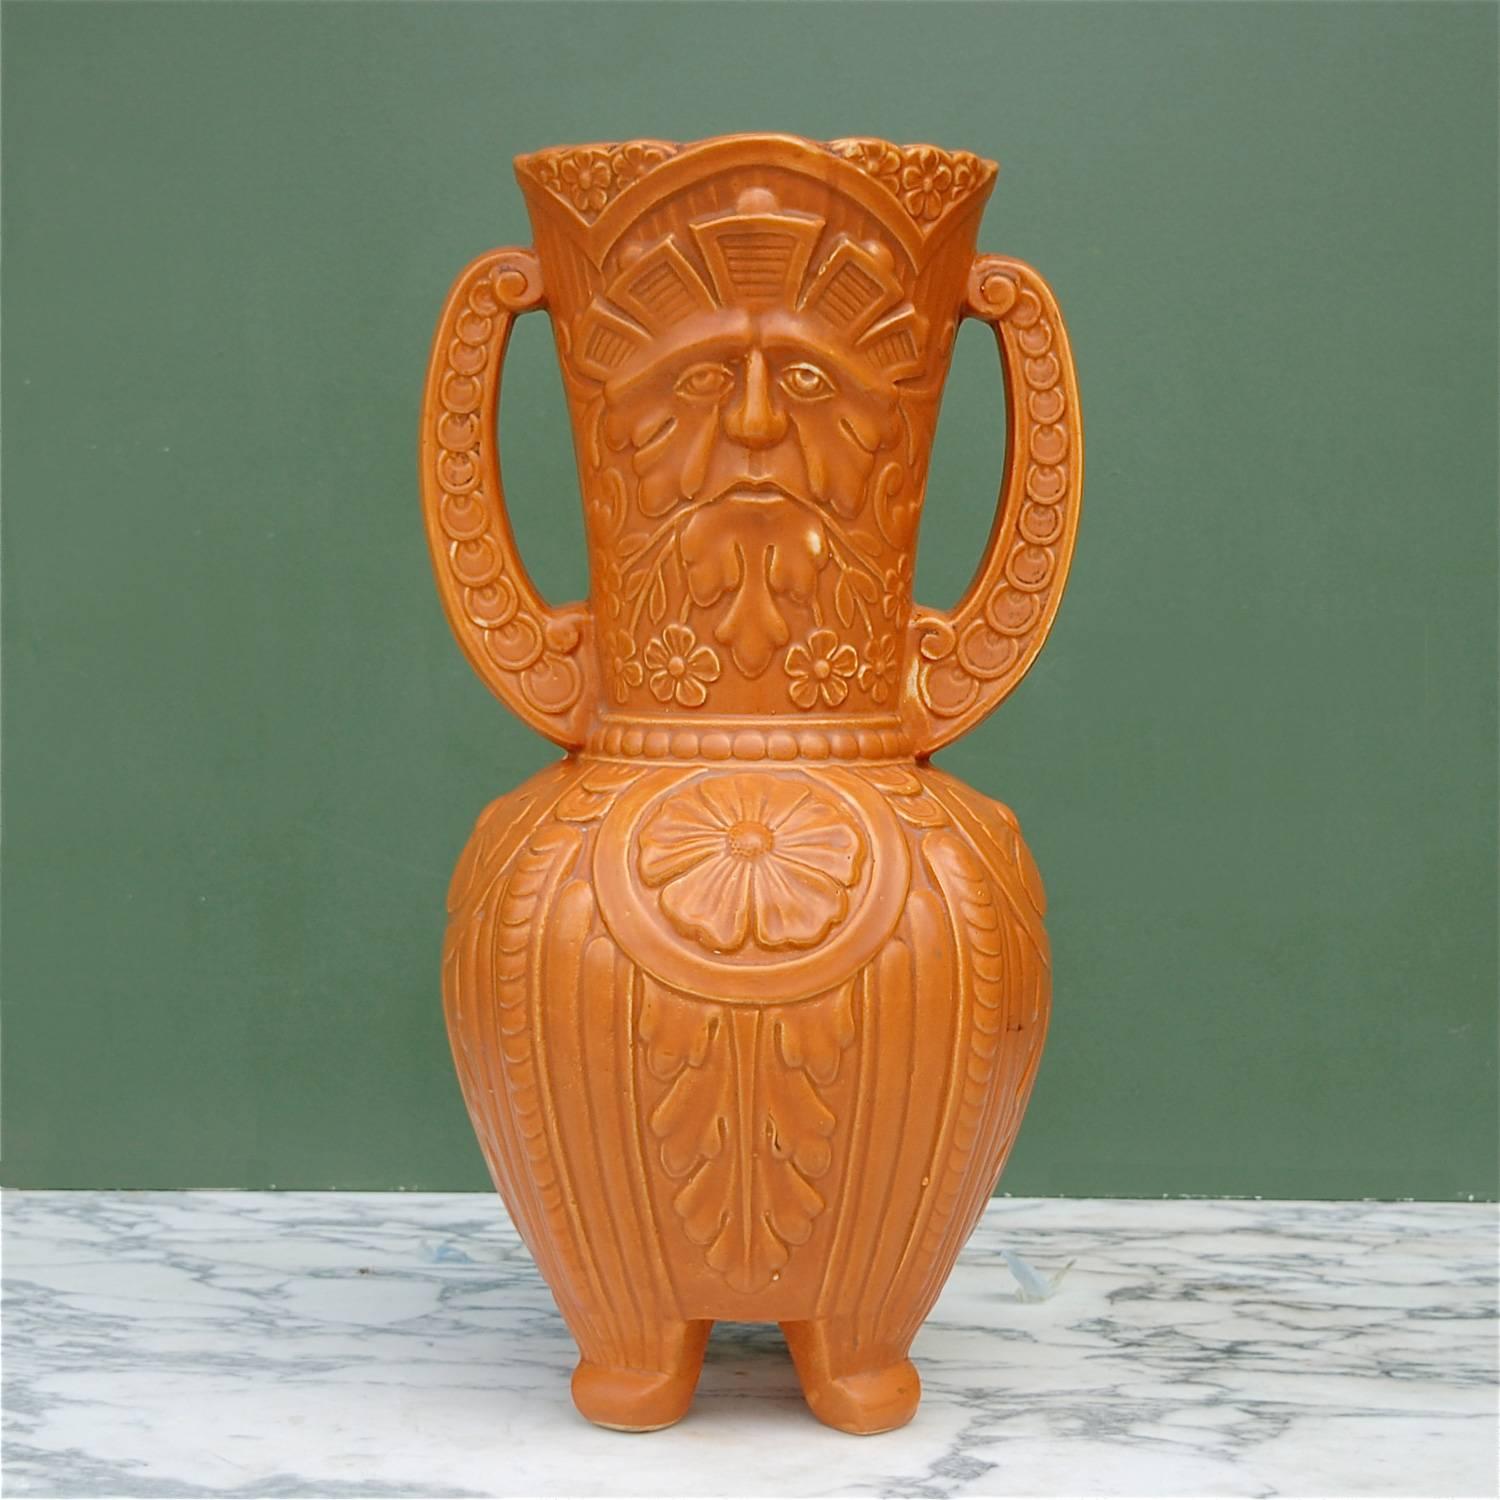 Tall, ceramic vase, urn or vessel with a raised relief of the Green Man. The motif of the Green Man celebrates the earliest archetype of the Forest God, the spirit of all that things green. Here it's represented by a face surrounded by and made from